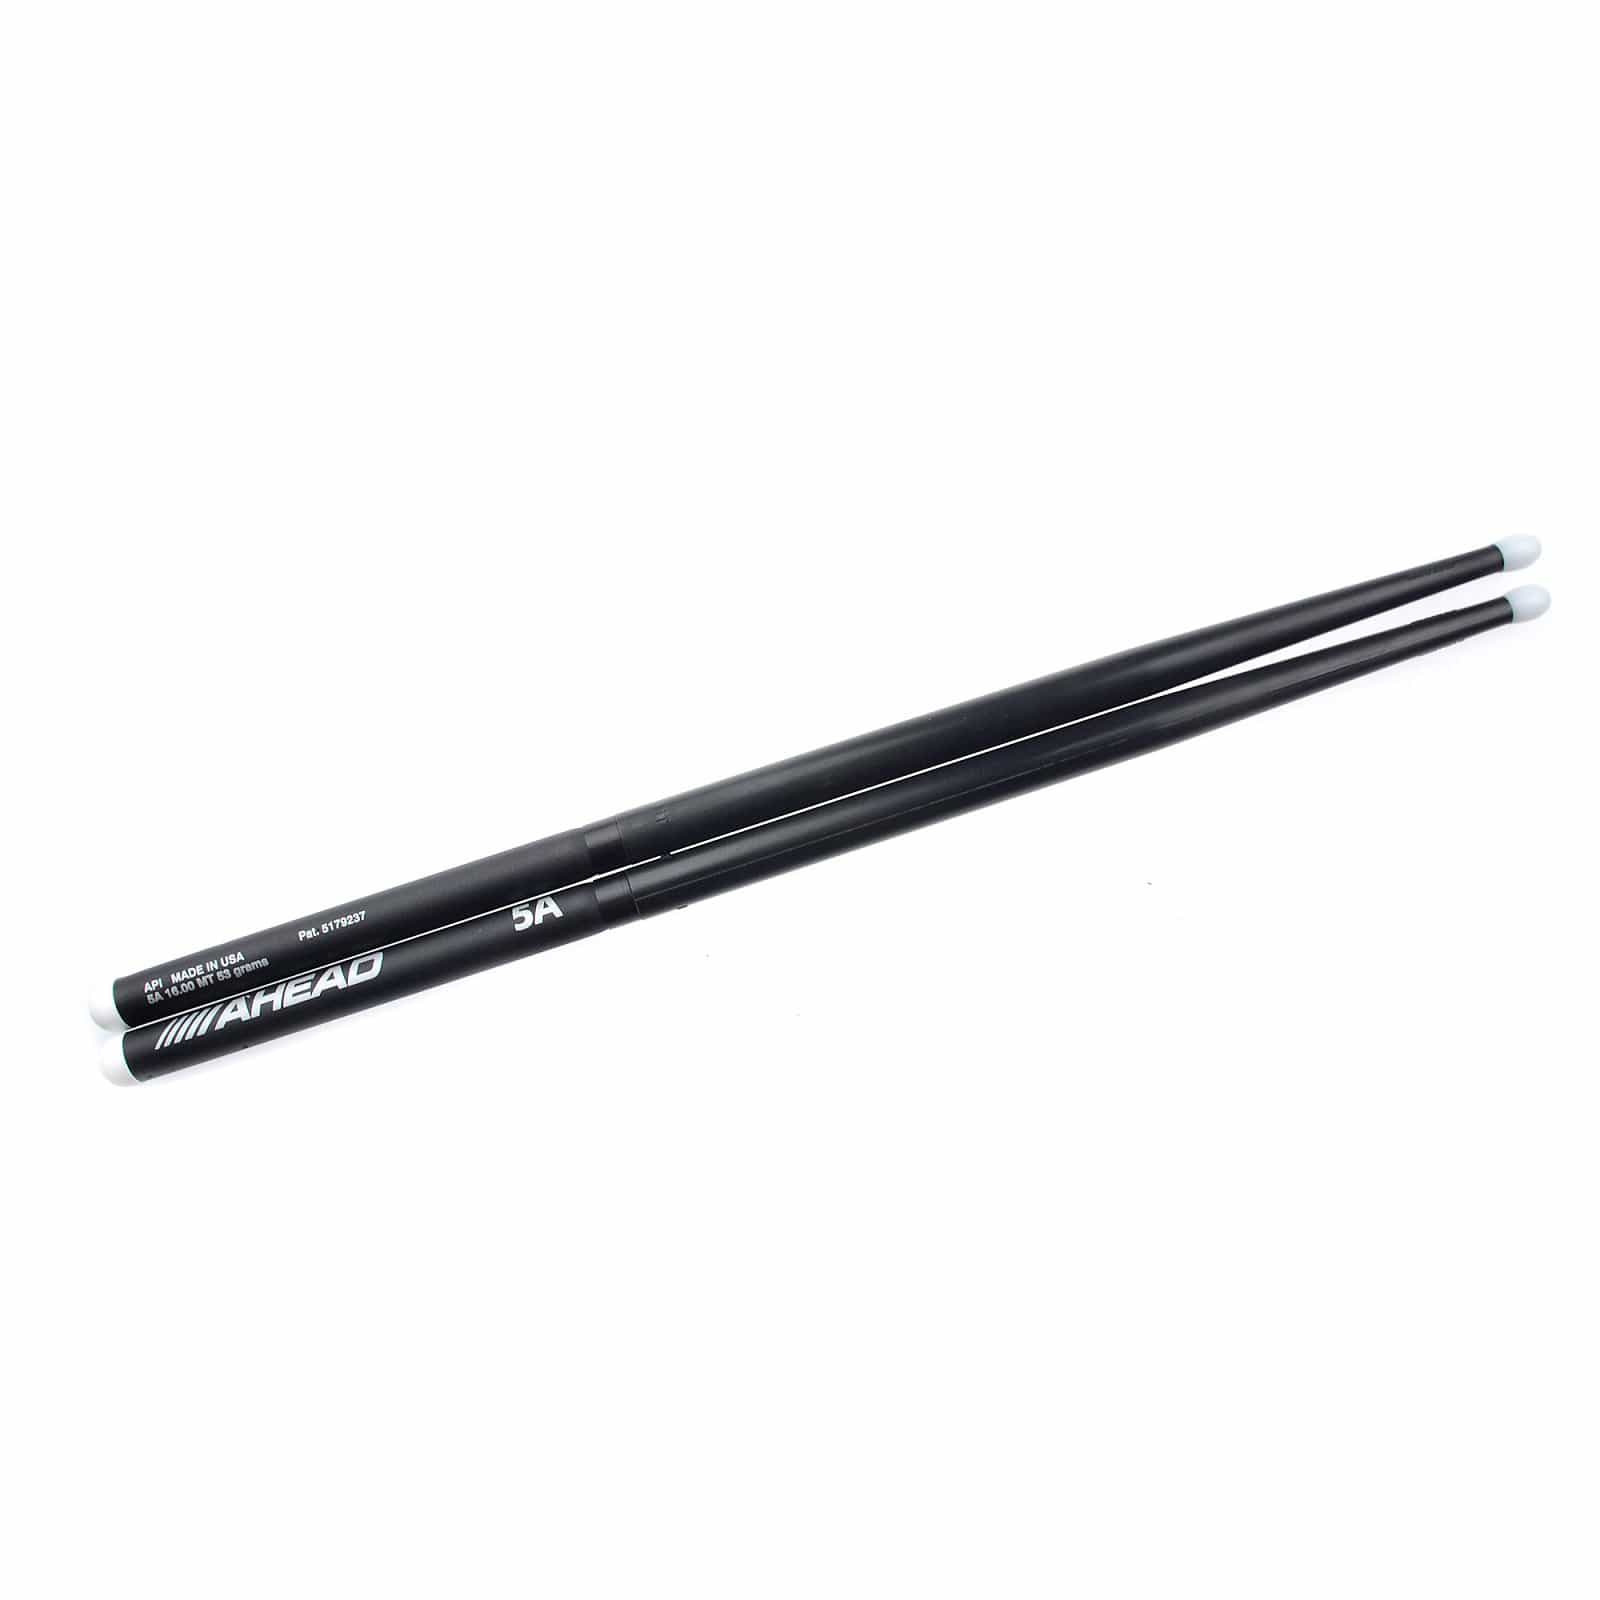 Ahead 5A (MT) 16" (53 grams) Drums and Percussion / Parts and Accessories / Drum Sticks and Mallets